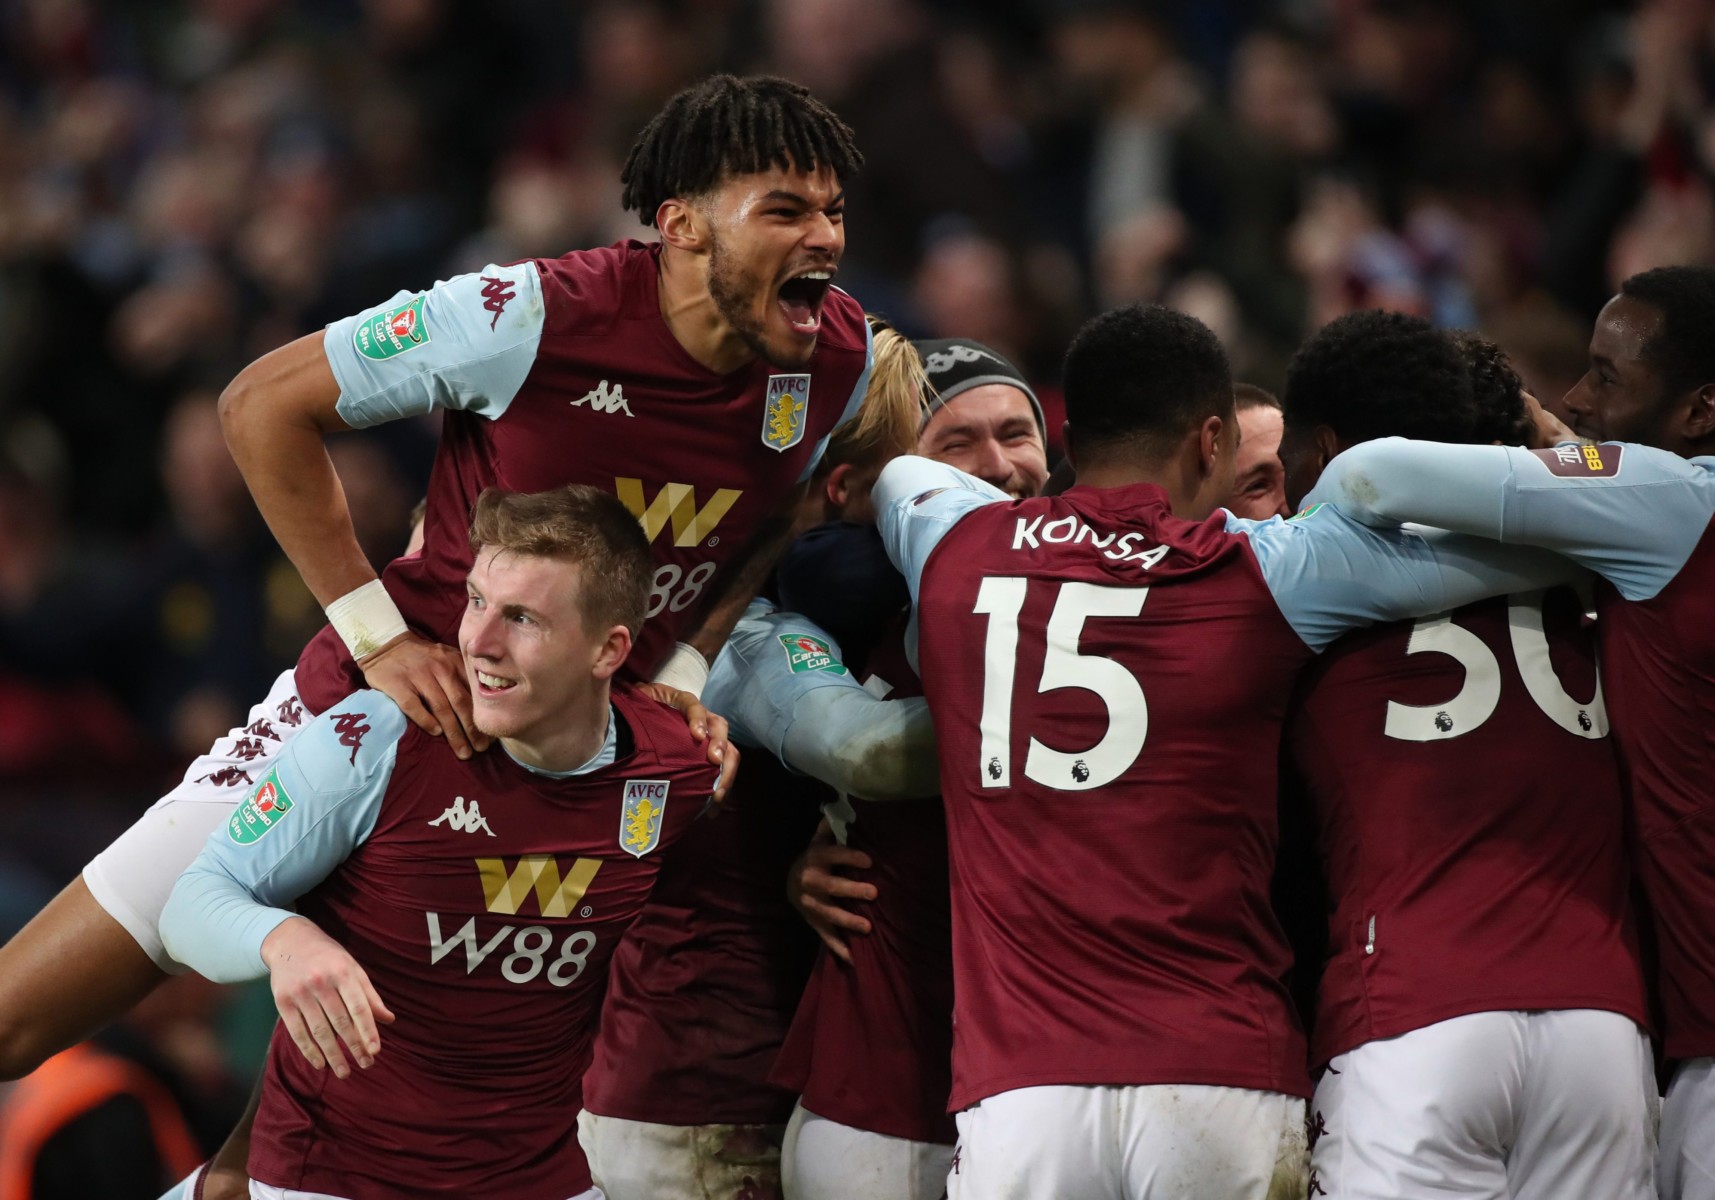 Aston Villa sporting director Jesus Garcia Pitarch believes there should be no relegation this season, saving his side from dropping back down